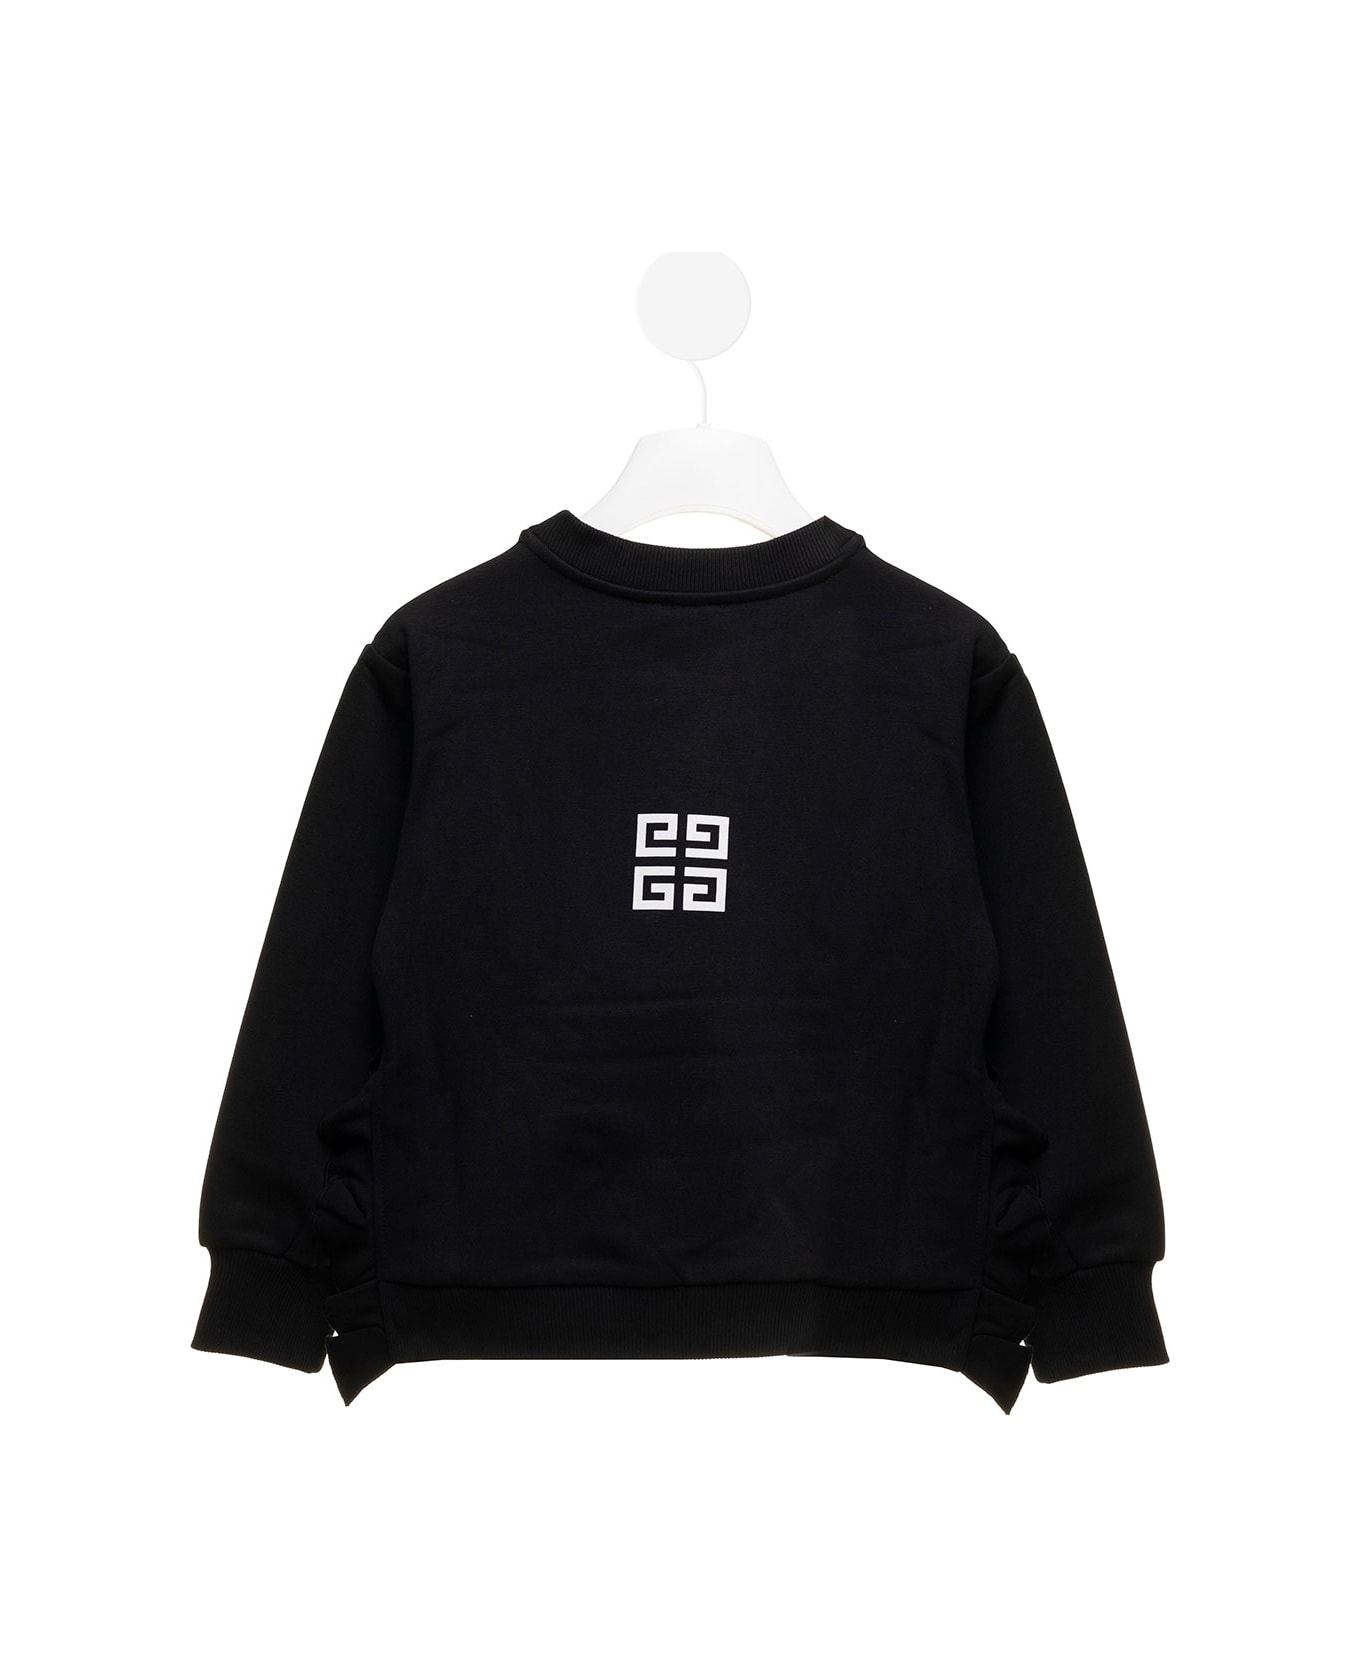 Givenchy Black Jersey Sweatshirt With Logo And Ruffles Detail Givenchy Kids Girl - Black